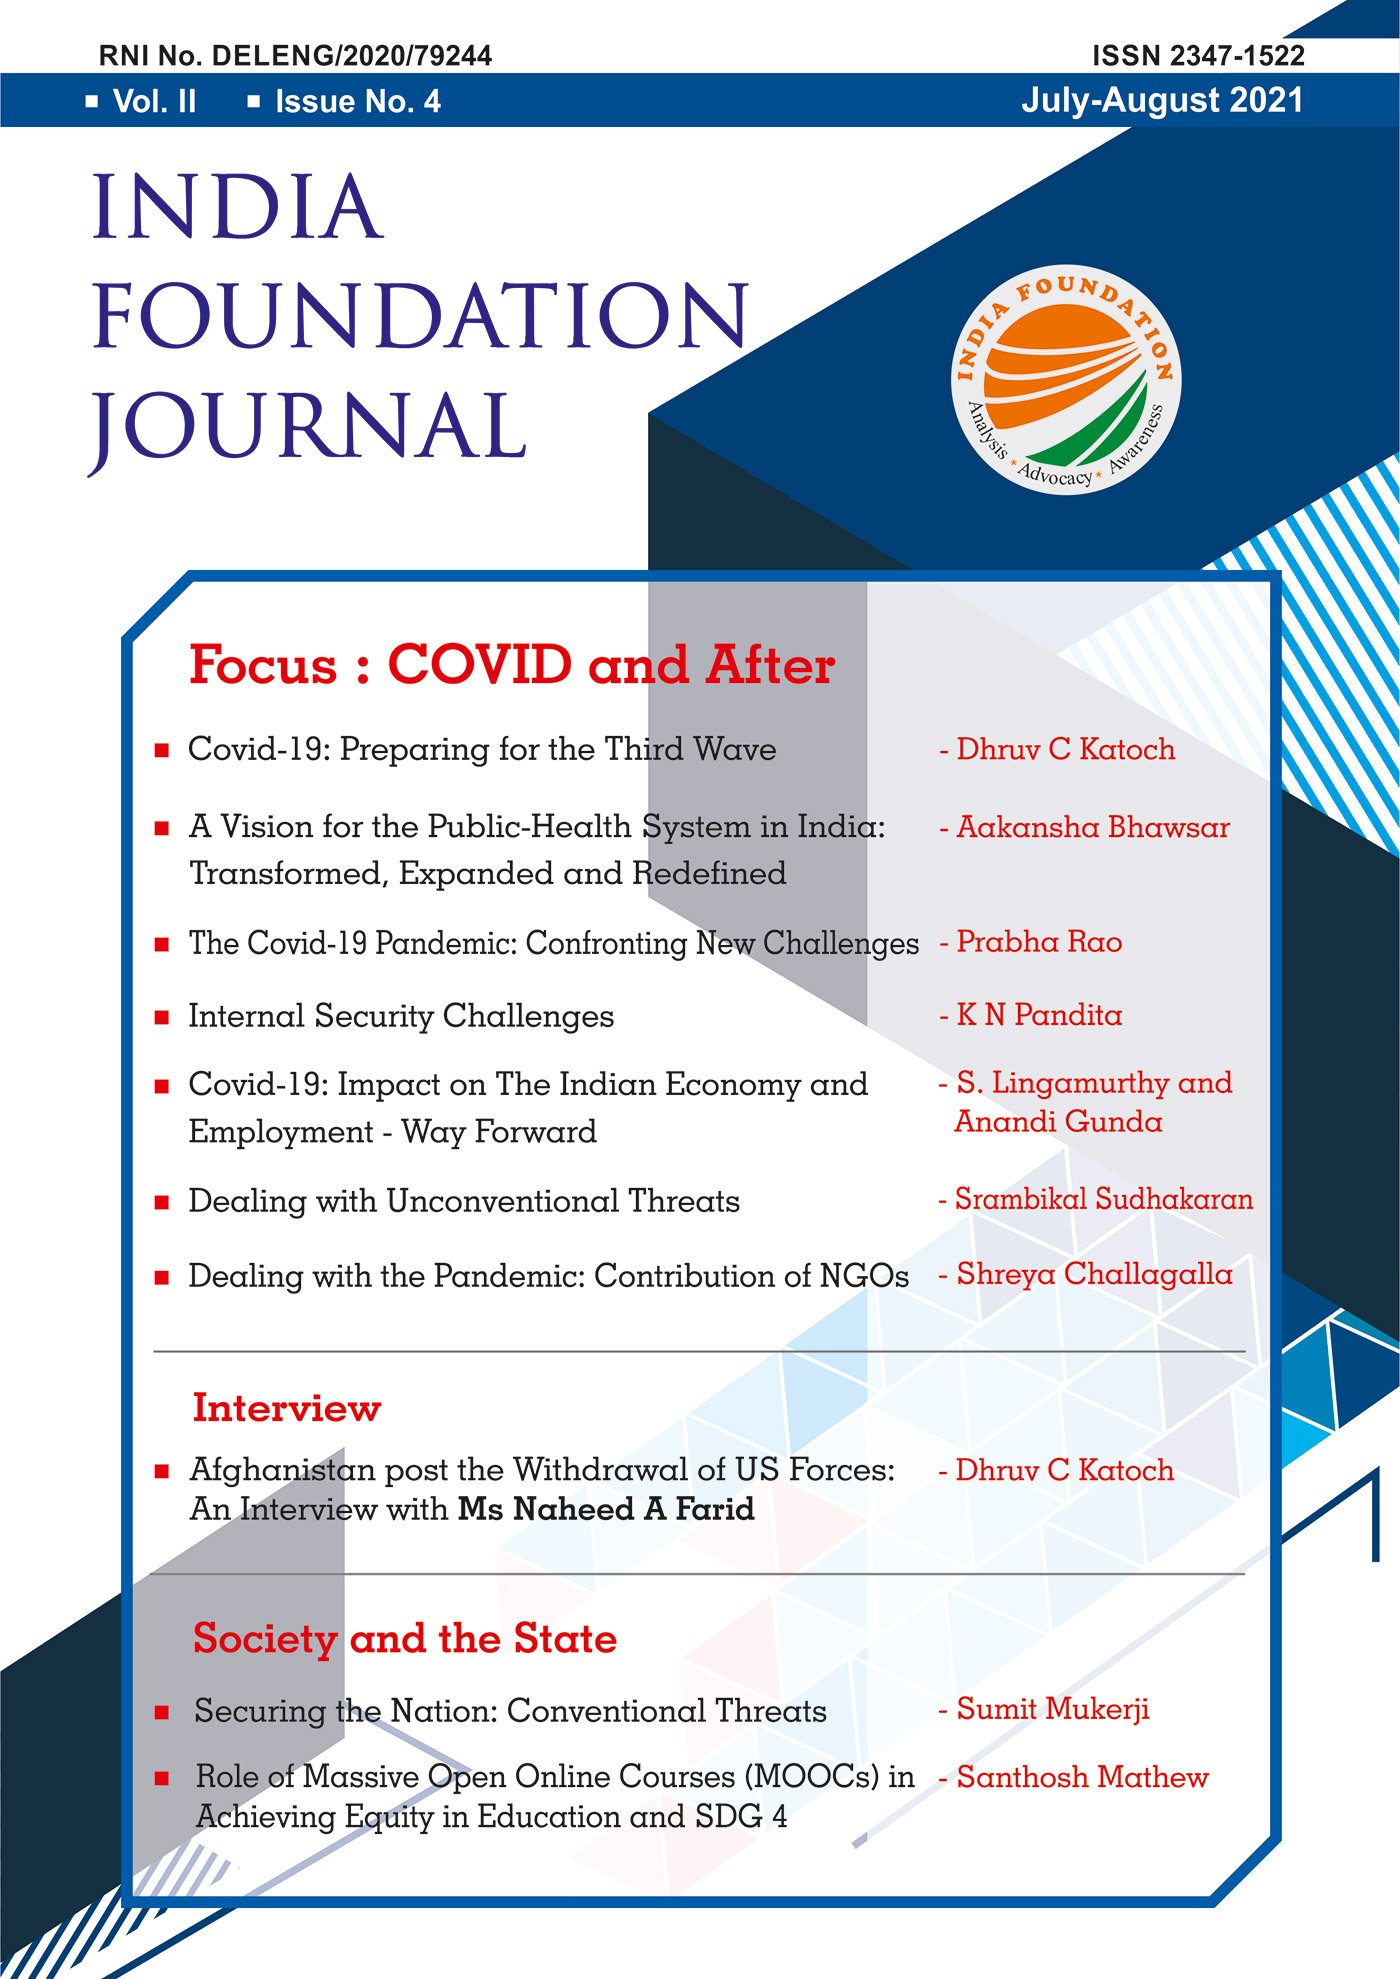 India Foundation Journal July-August 2021